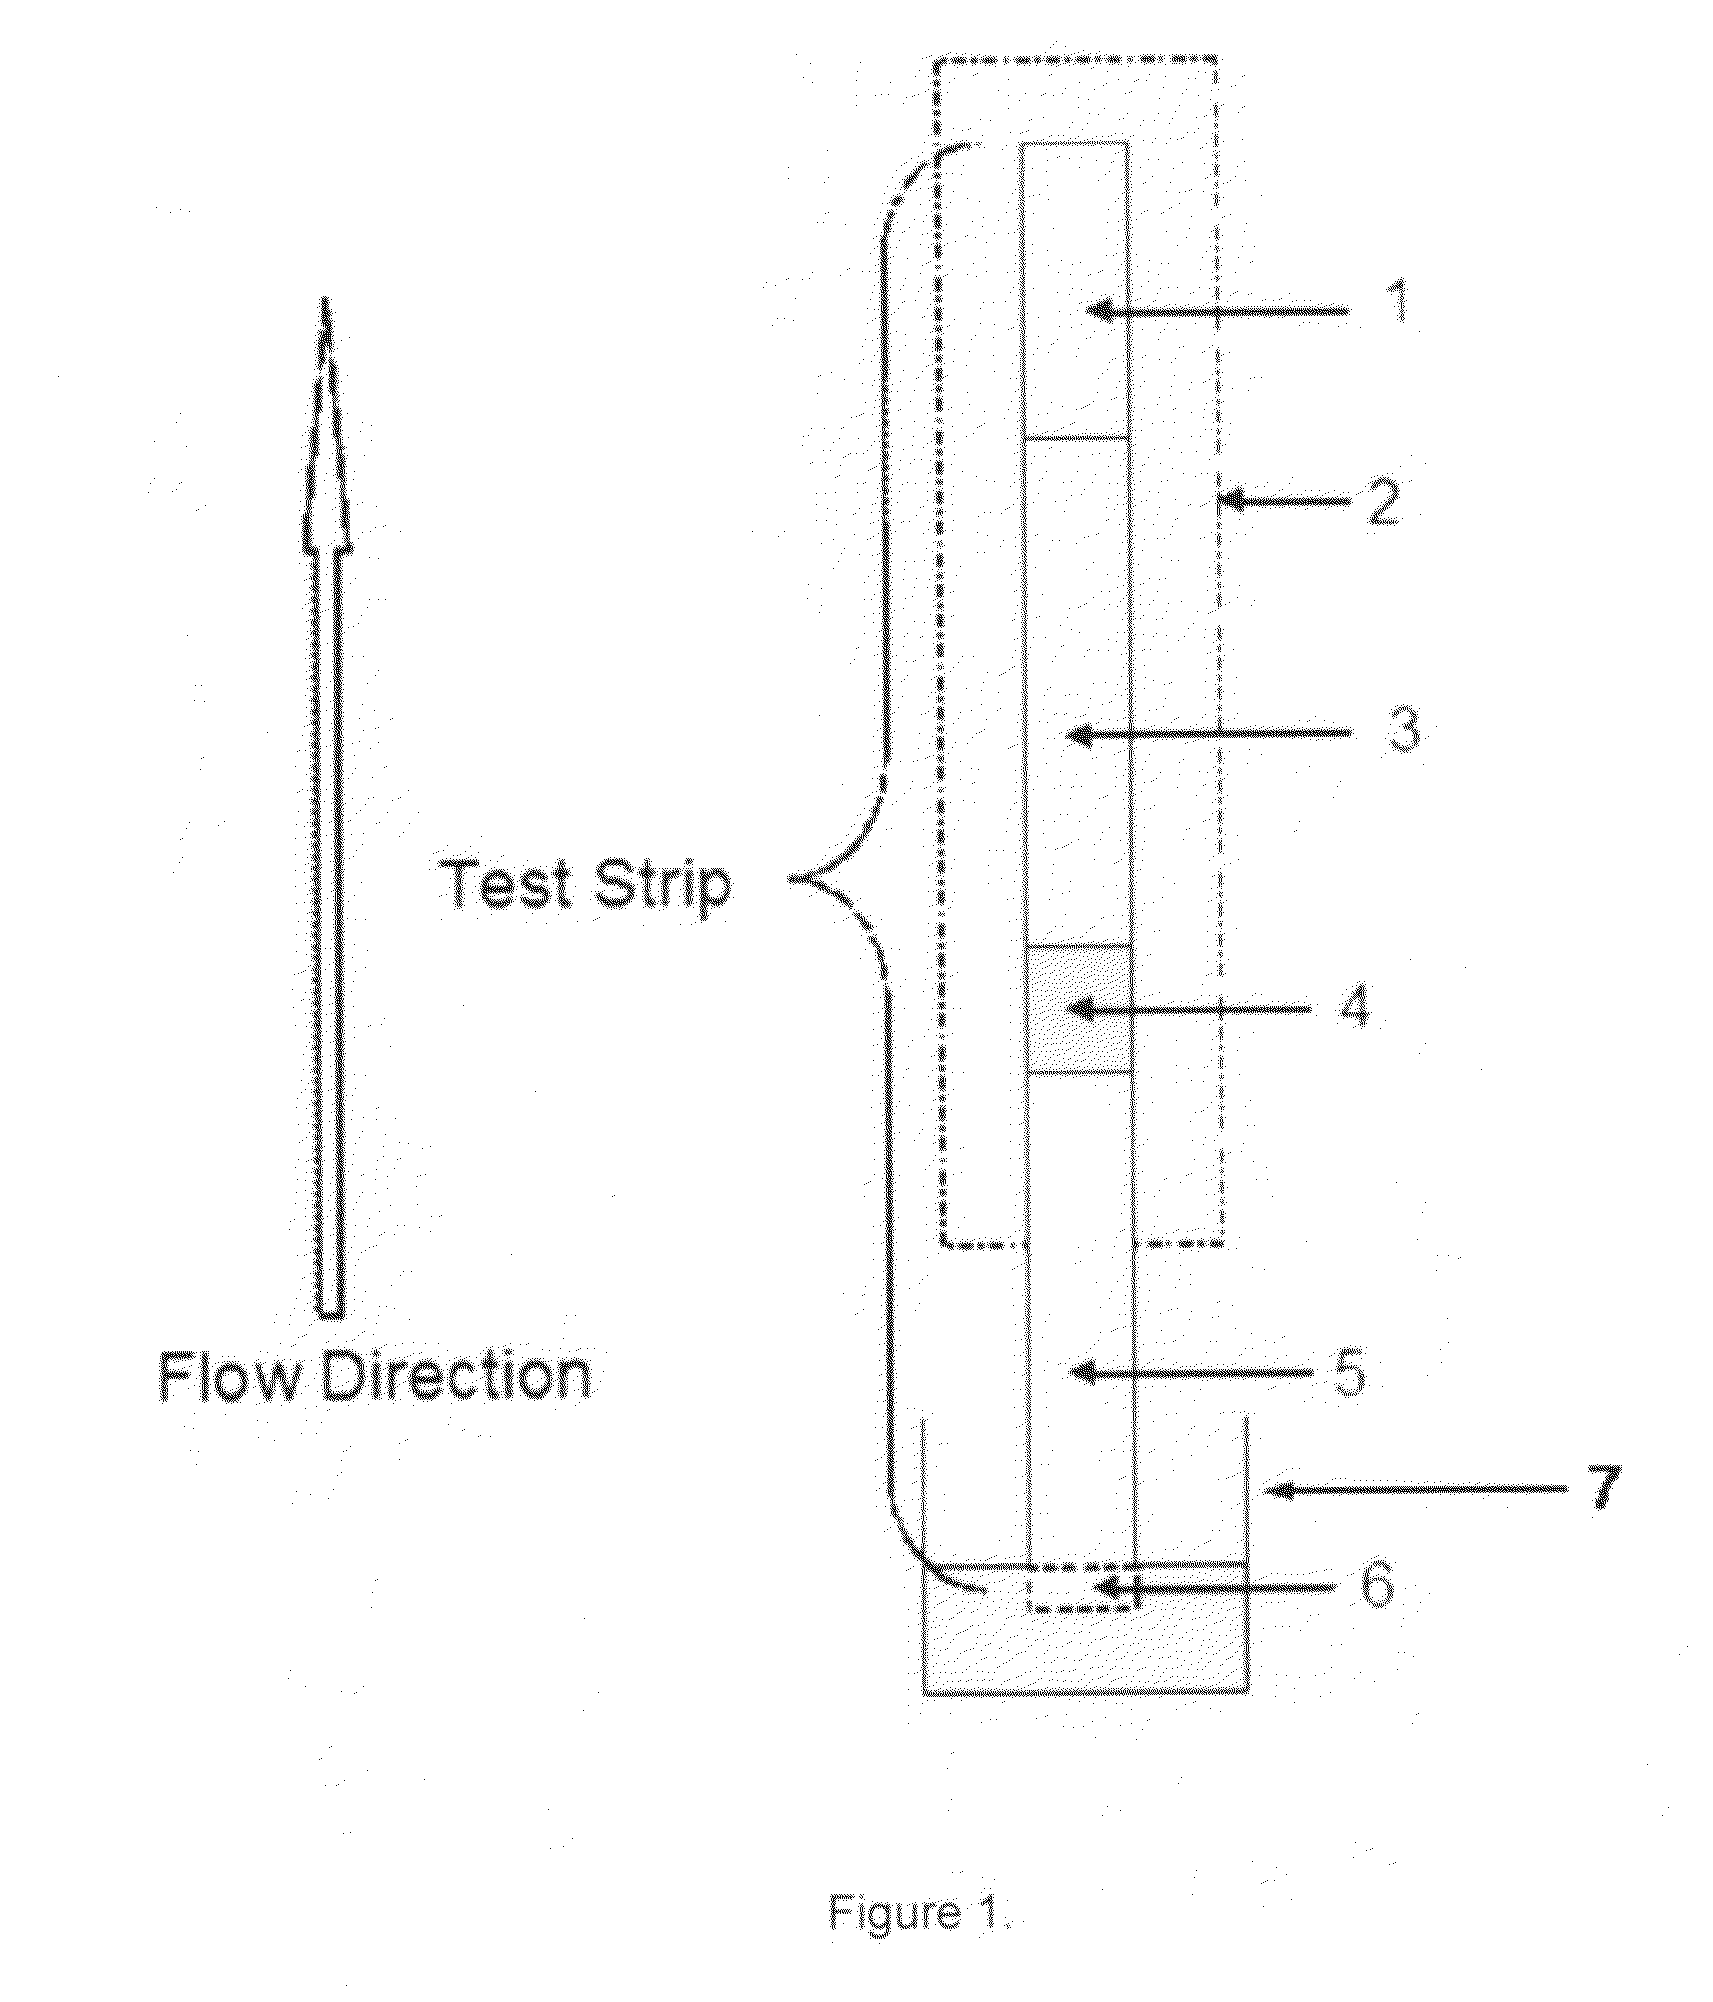 Rapid Lateral Flow Assay Method for Detecting Low Quantity Liquid or Dry Samples